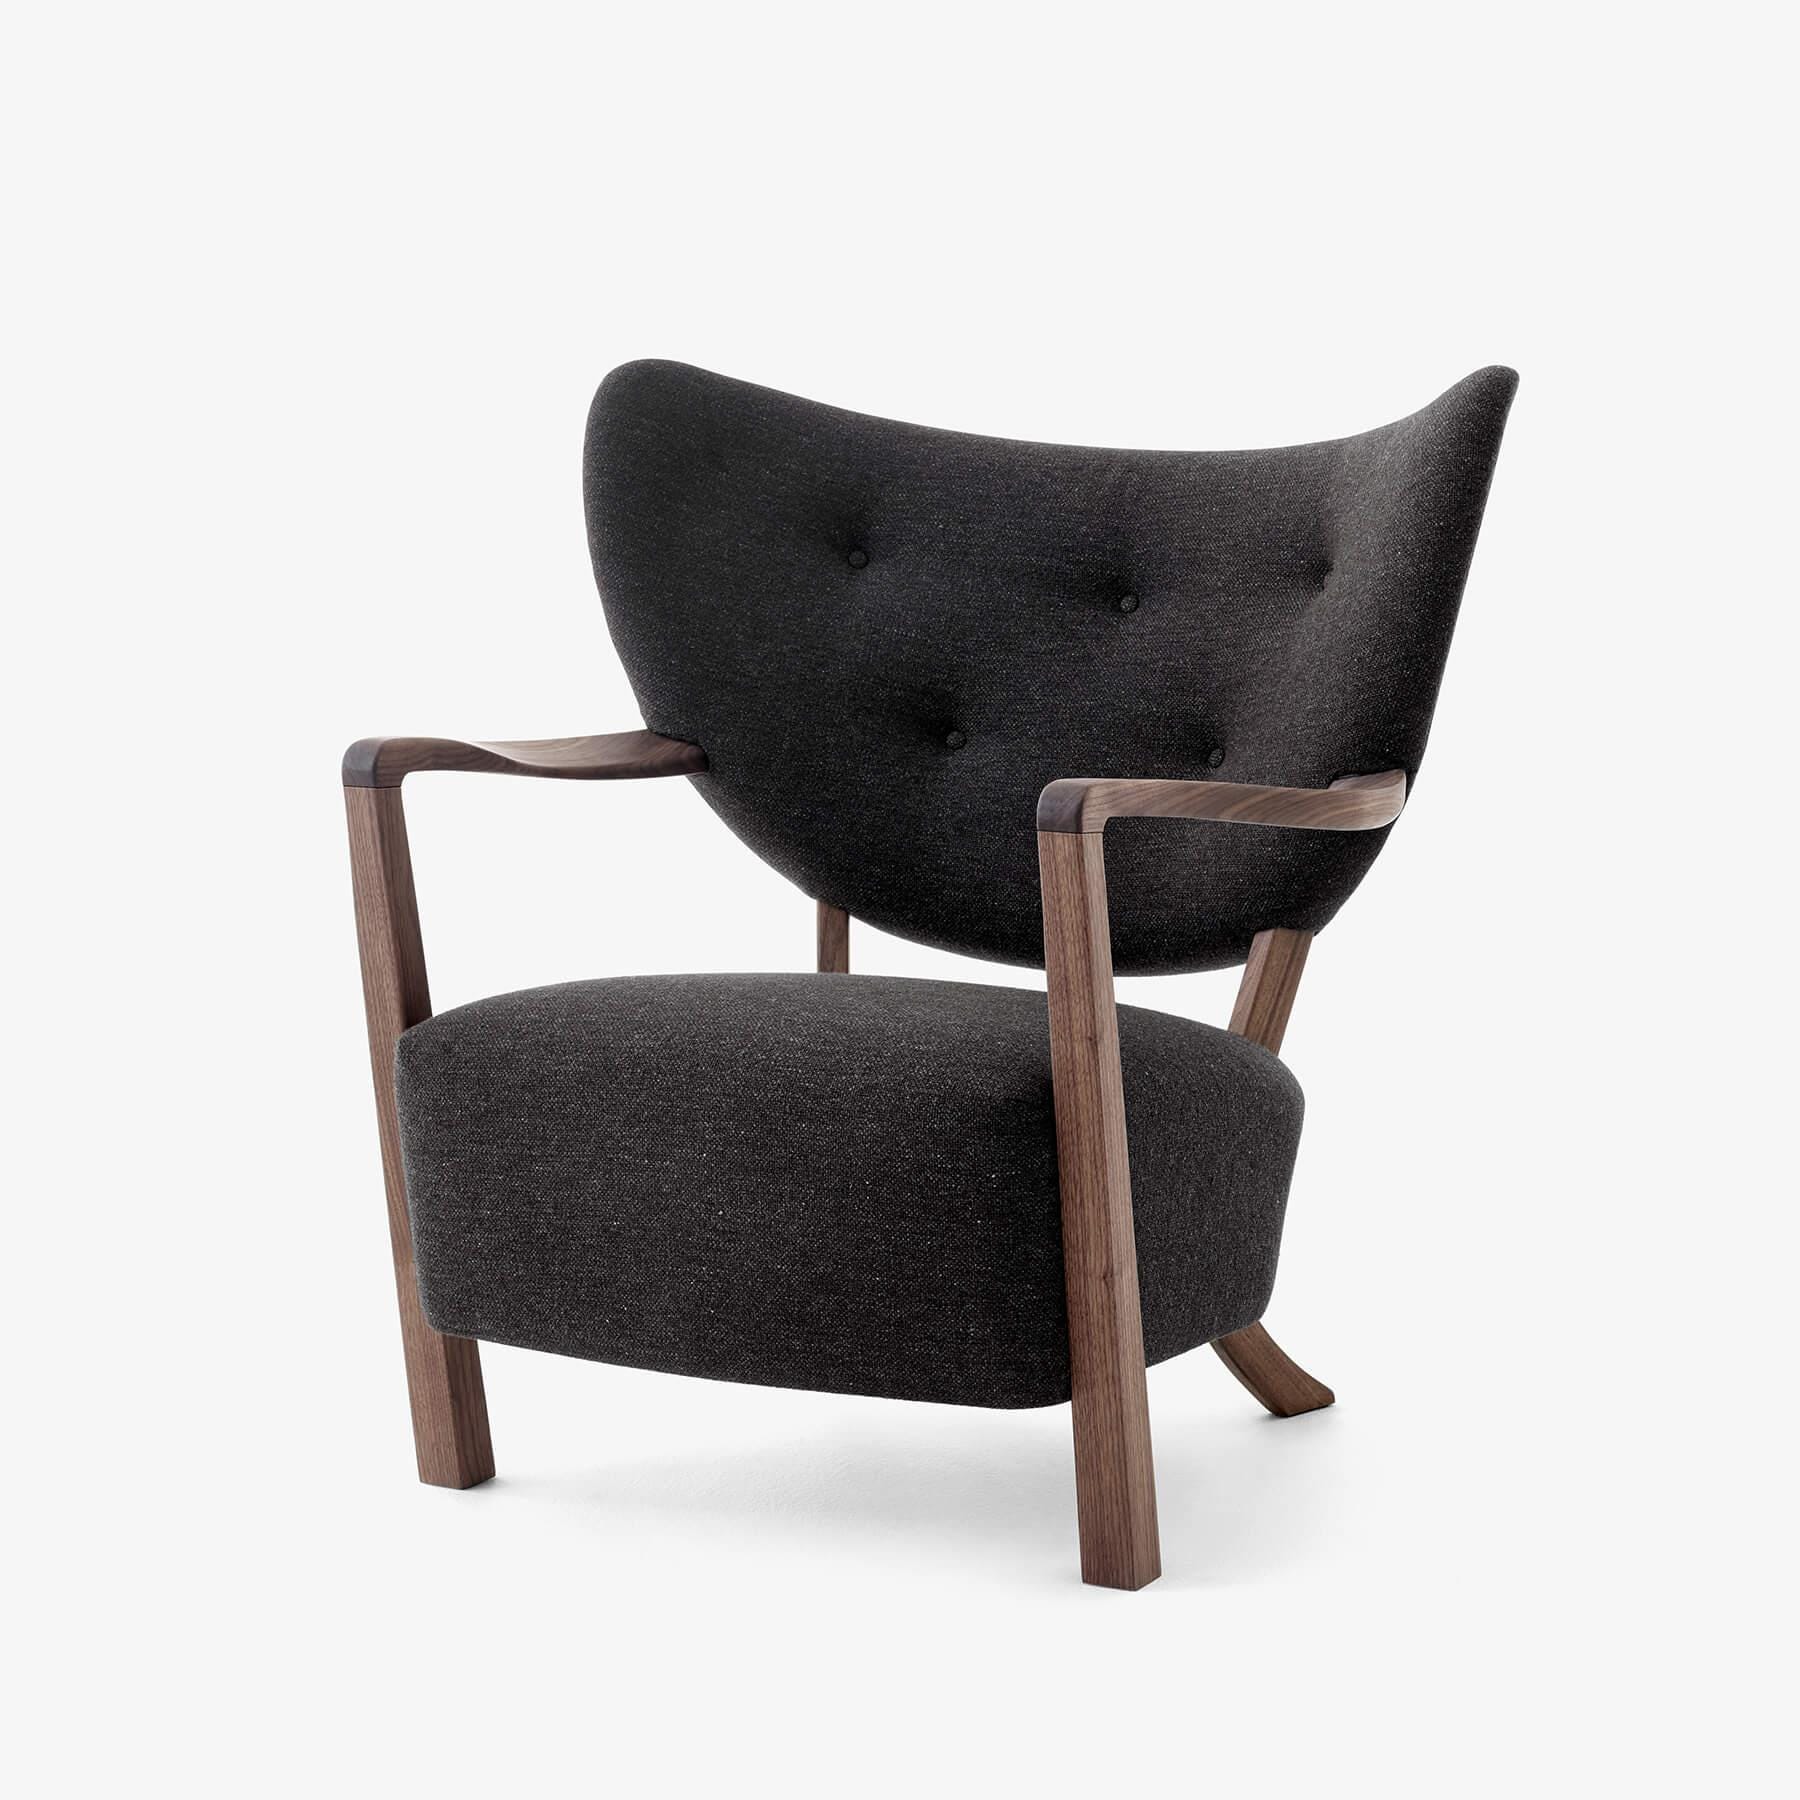 Tradition Wulff Adt2 Lounge Chair Hallingdal 376 Oiled Walnut No Ottoman Black Designer Furniture From Holloways Of Ludlow